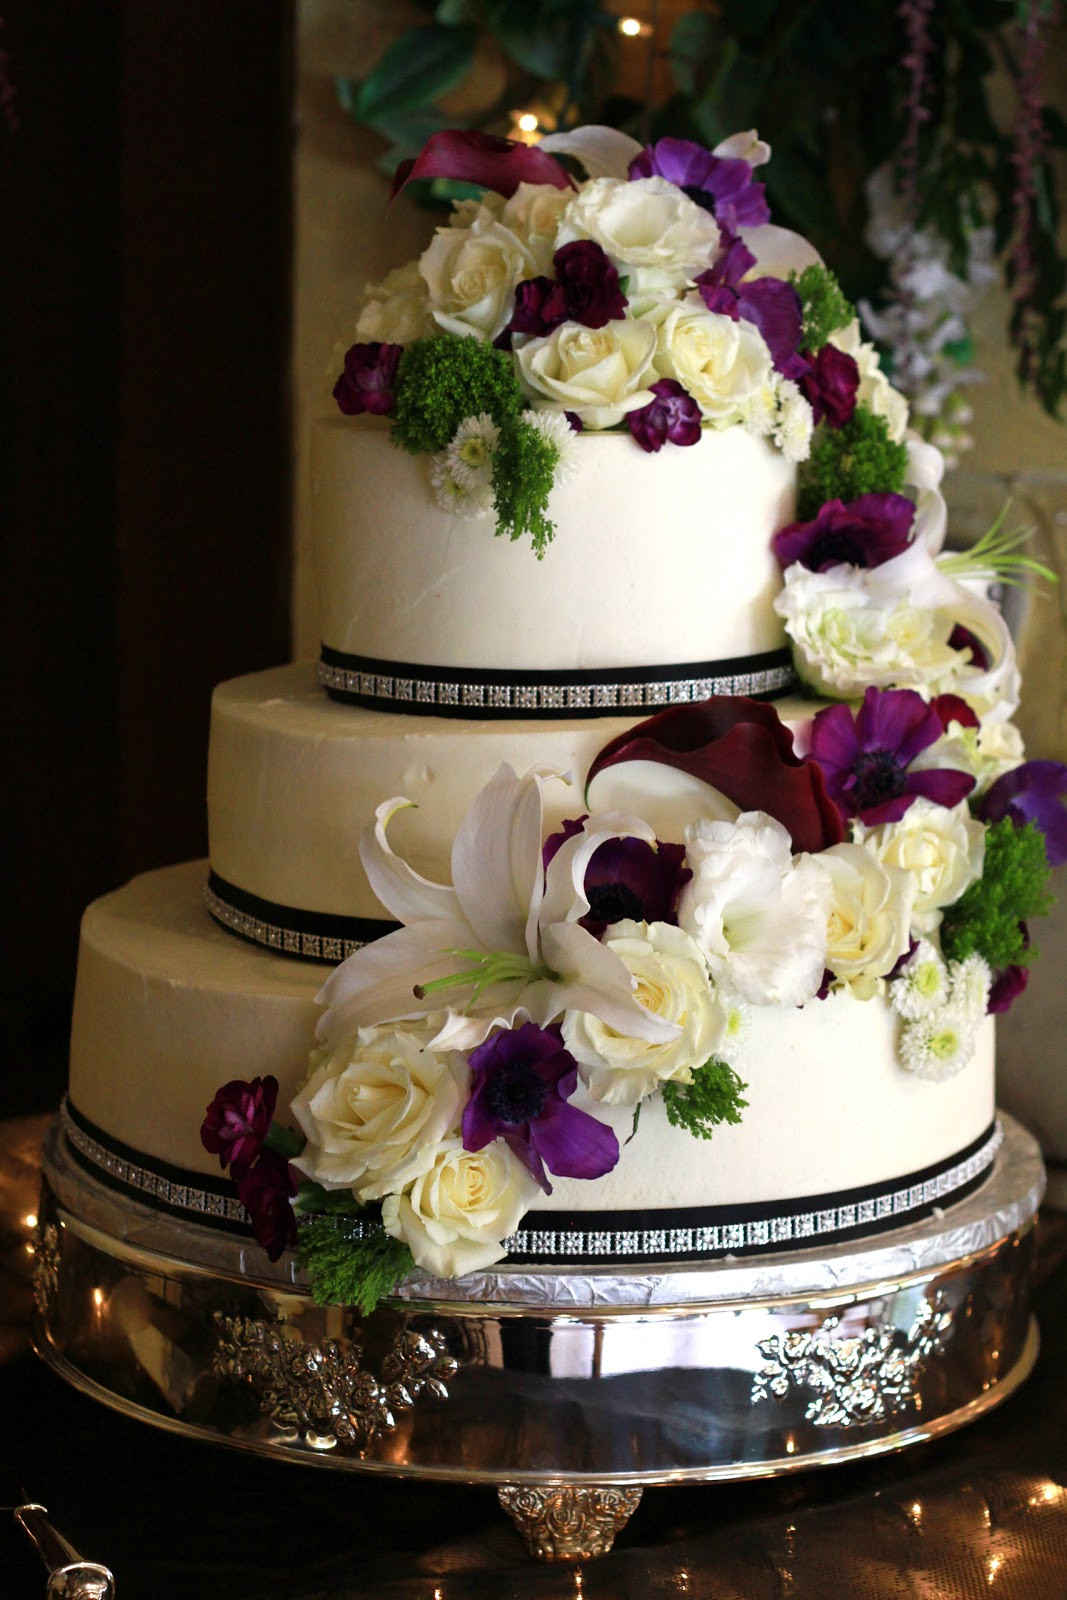 Wedding Cakes Images
 Exquisite Cookies 3 Tier wedding cake with fresh flowers